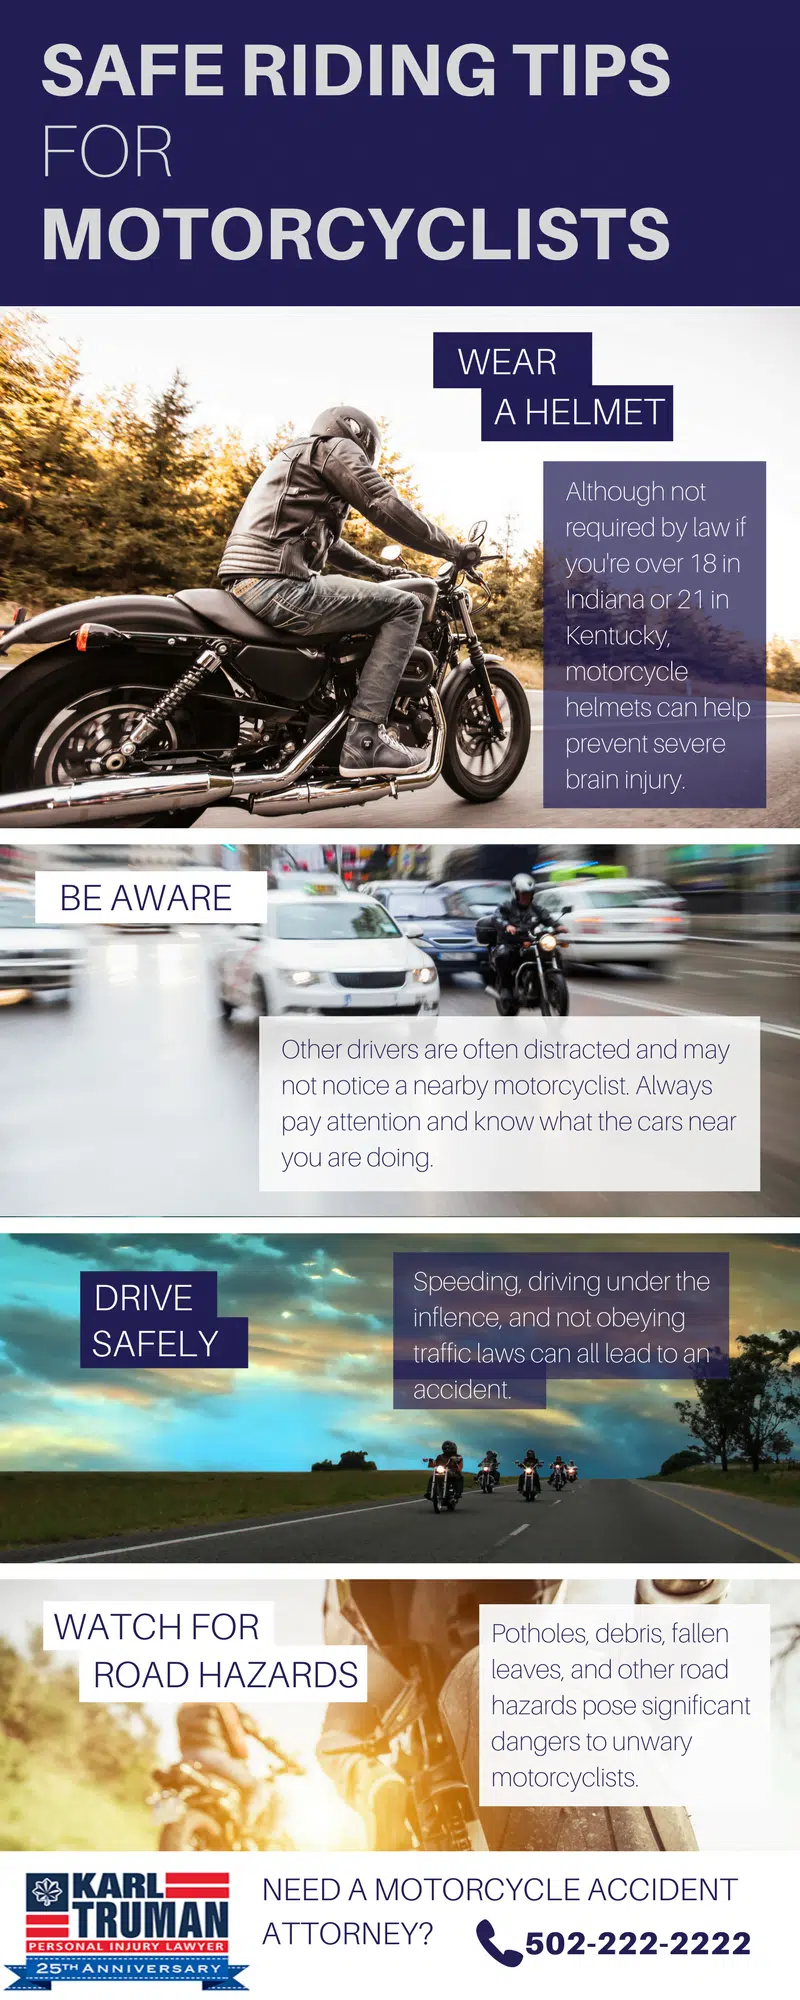 Safe Riding Tips for Motorcyclists. 1. Wear a helmet, 2. Be Aware, 3. Drive Safely, 4. Watch for Road Hazards. Need a motorcycle accident attorney, call Karl Truman at 502-222-2222